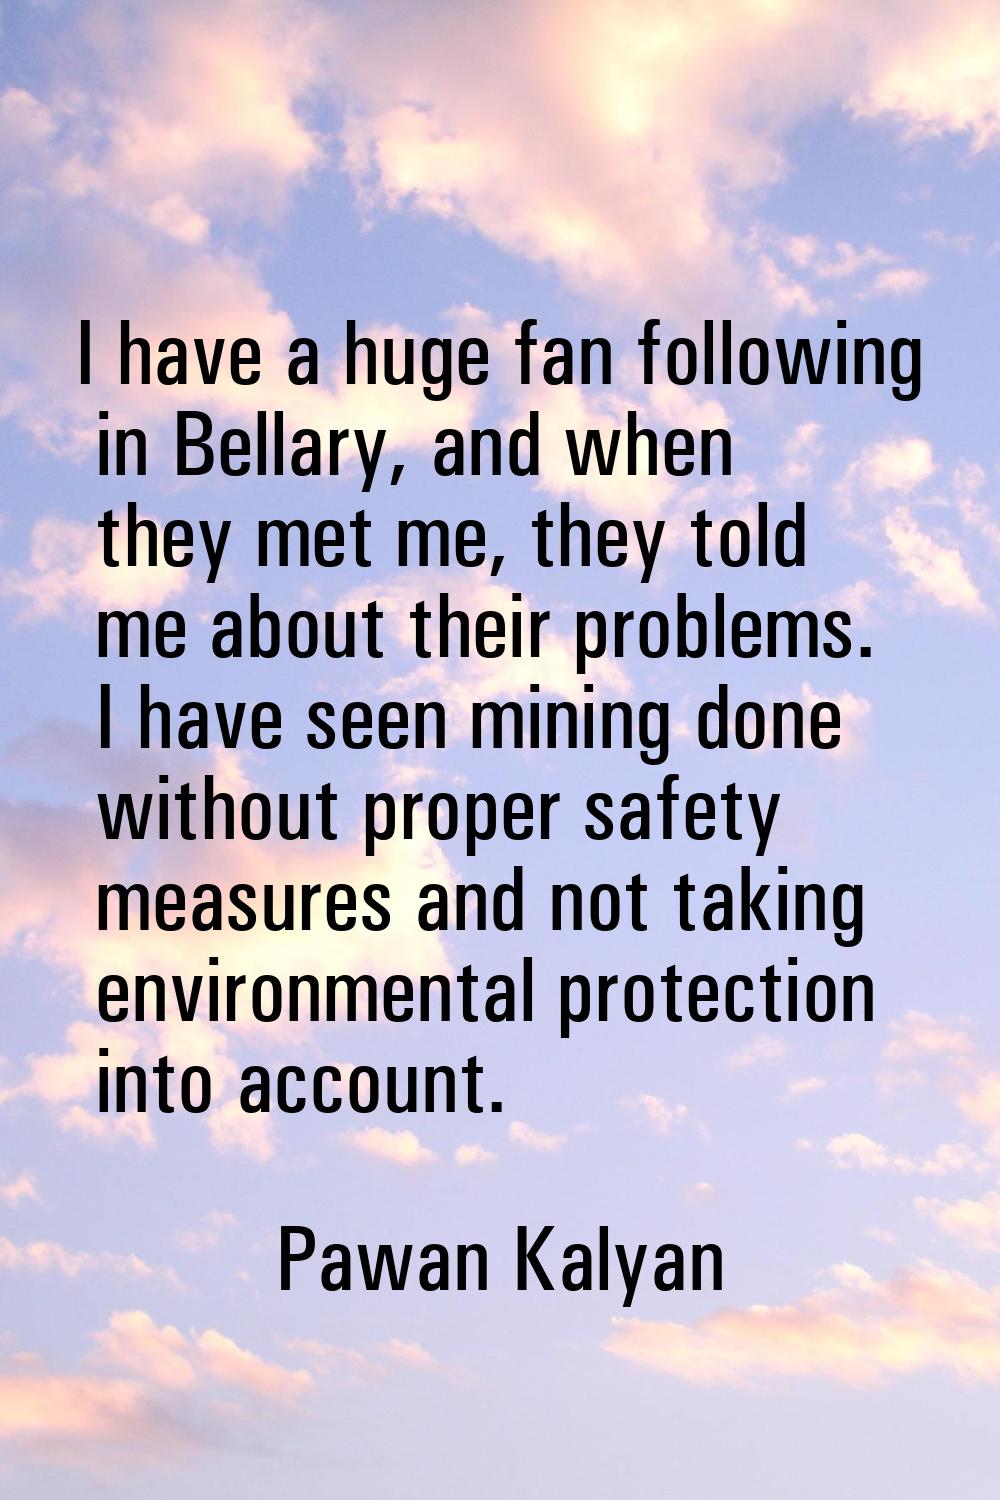 I have a huge fan following in Bellary, and when they met me, they told me about their problems. I 